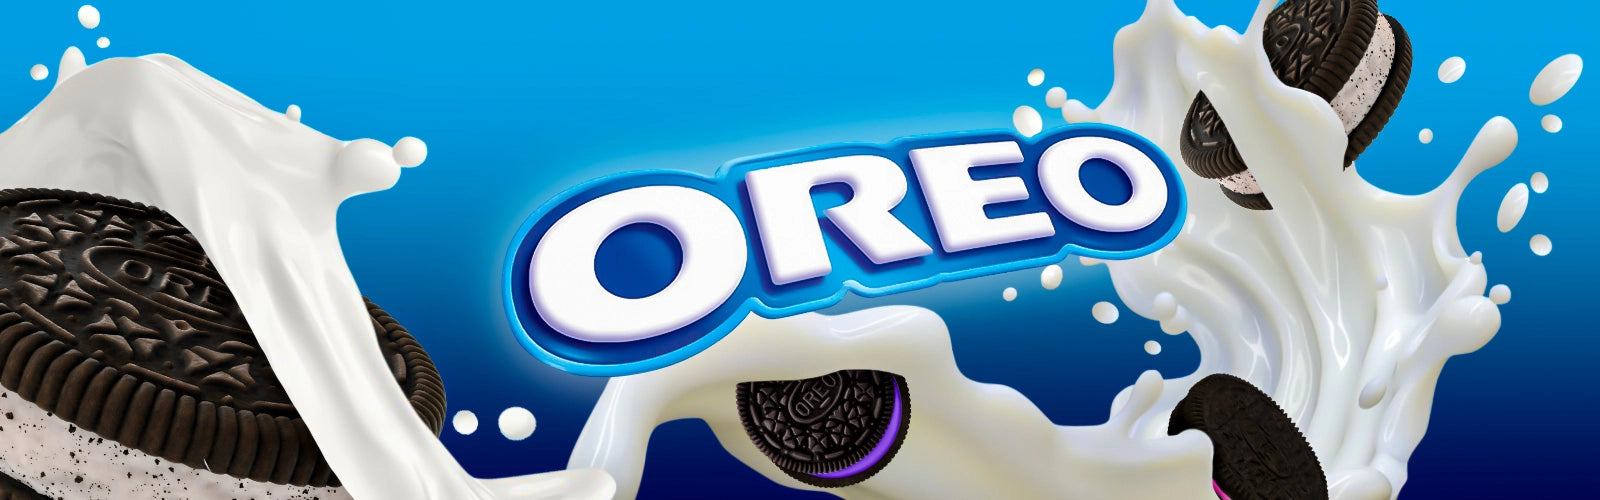 Oreo in collection banner